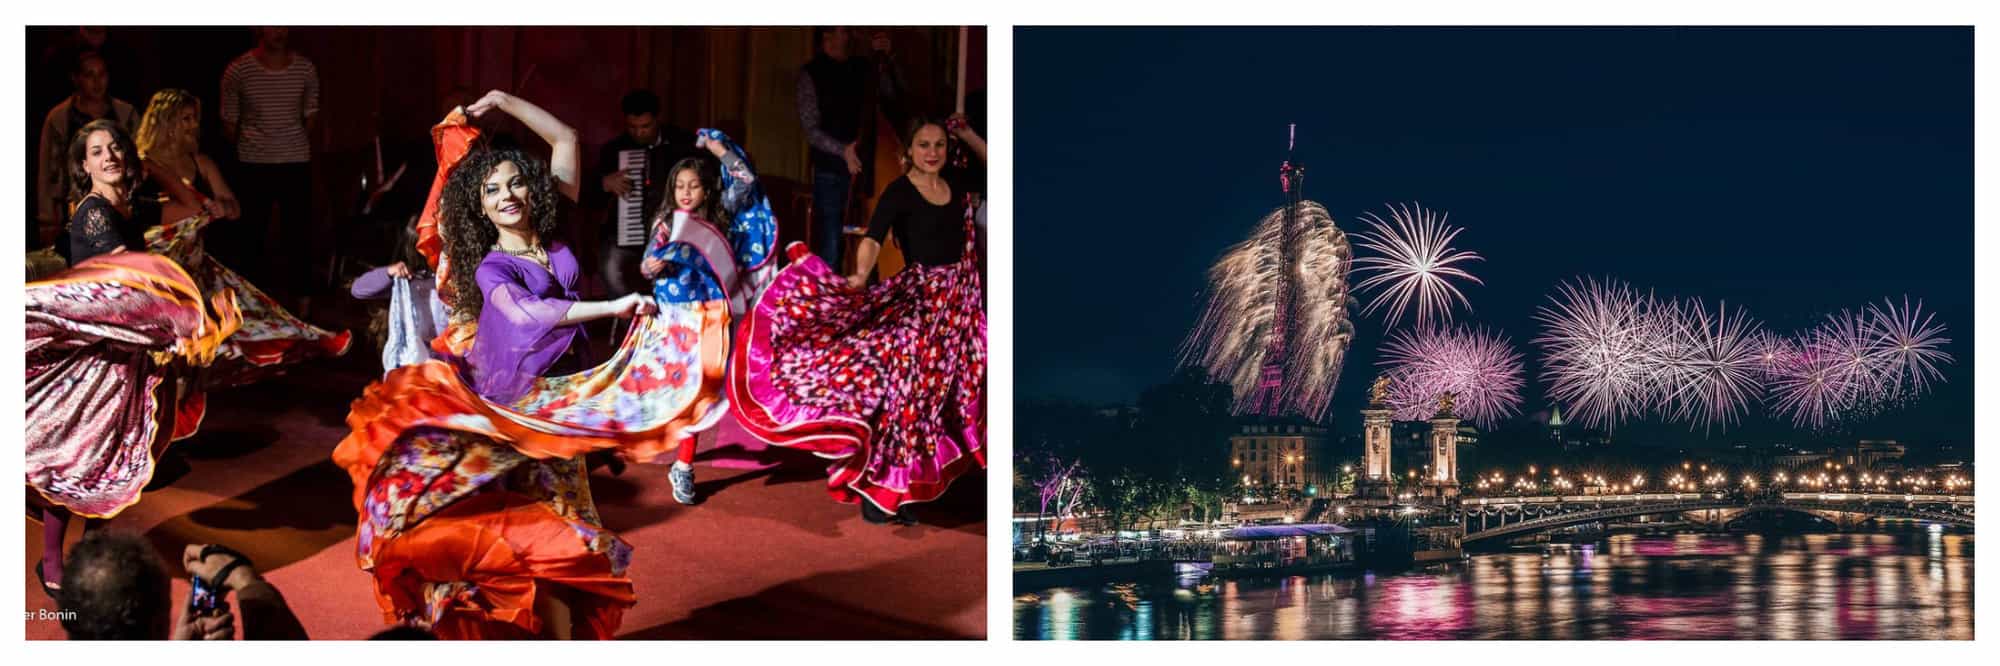 Left: A Gypsy-Romanian dance performance by a Tzigane circus family based in Paris called the Romanès. Right: The Eiffel Tower and the Paris sky is lit with fireworks.